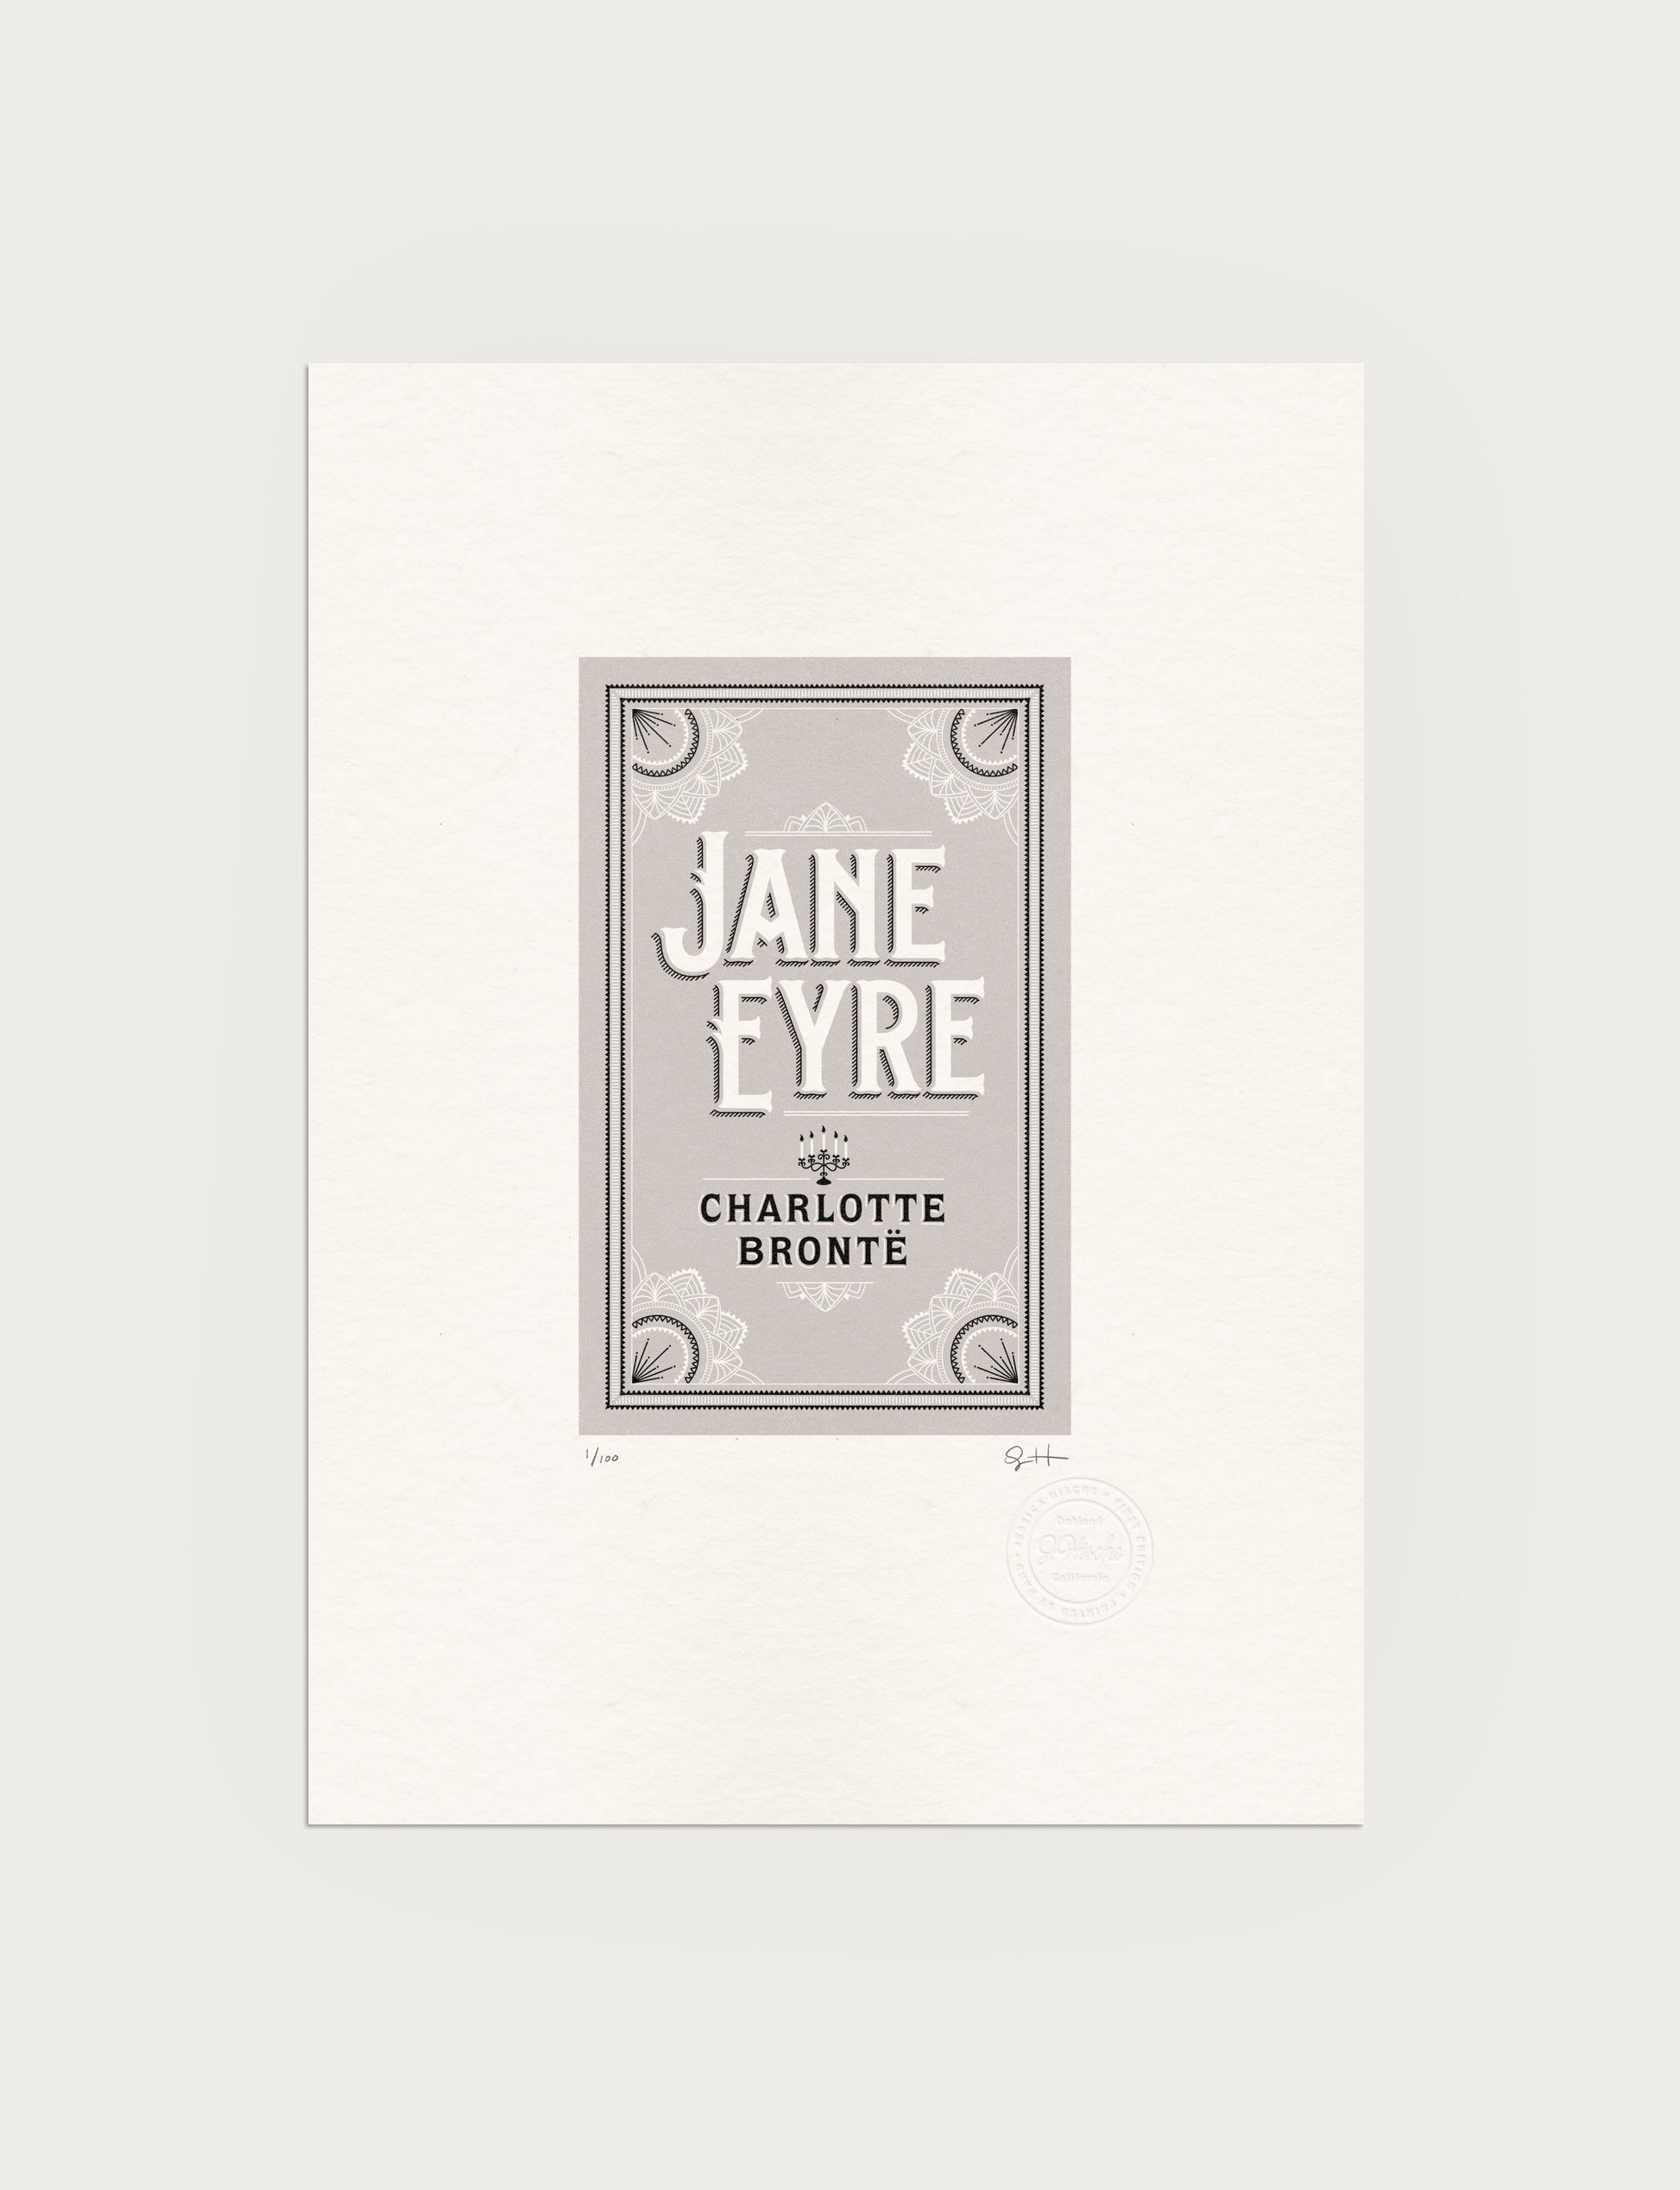 2-color letterpress print in gray and black. Printed artwork is an illustrated book cover of Jane Eyre including custom hand lettering.